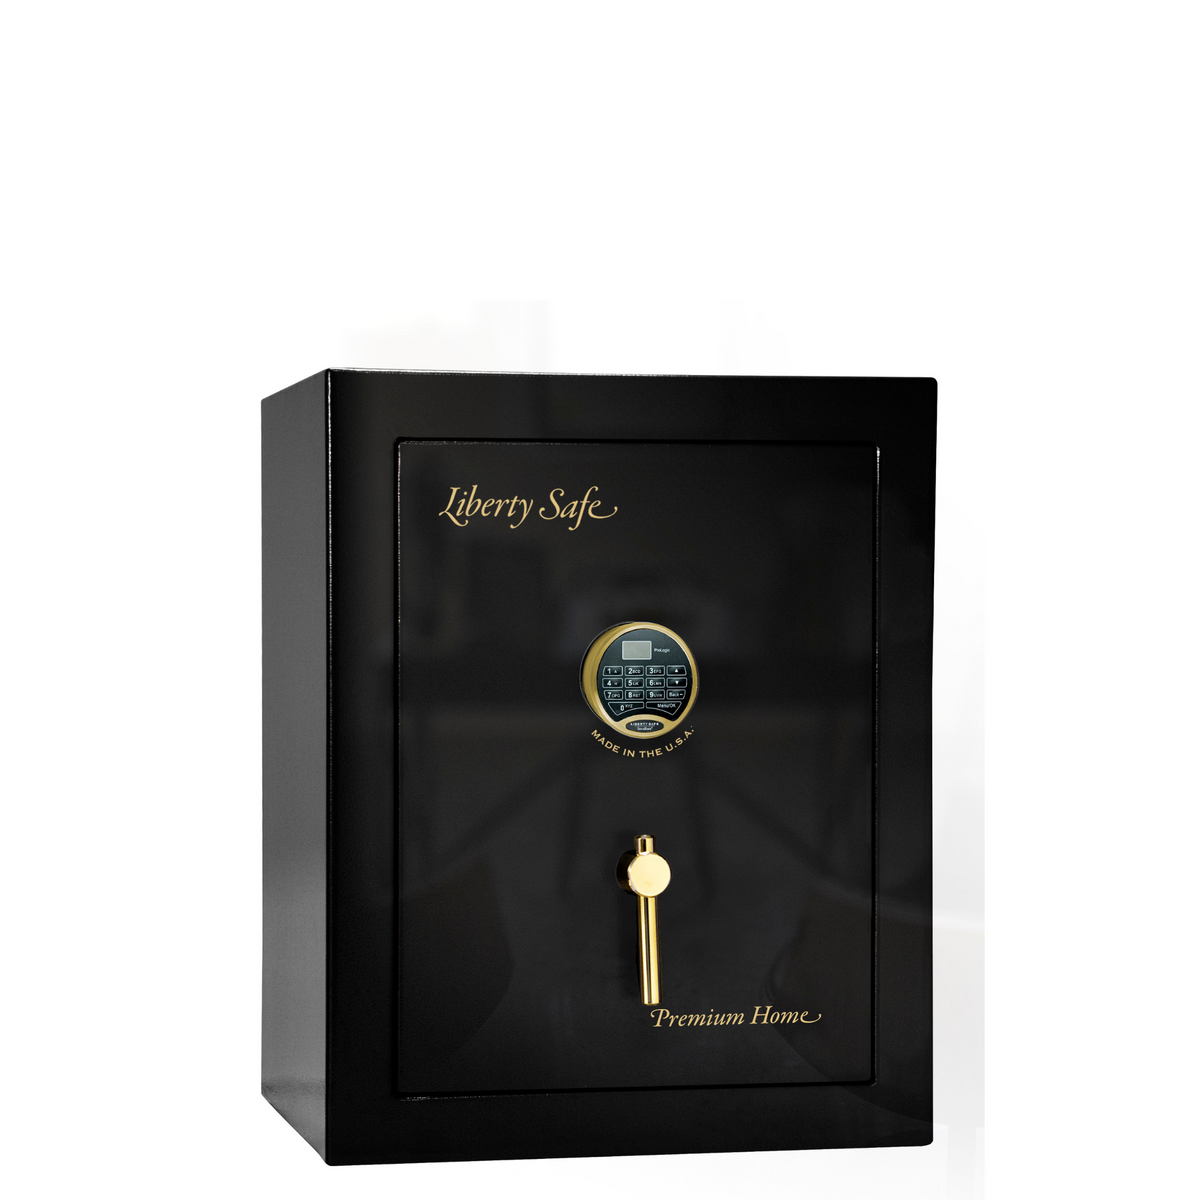 Premium Home Series | Level 7 Security | 2 Hour Fire Protection | 08 | Dimensions: 29.75&quot;(H) x 24.5&quot;(W) x 19&quot;(D) | Black Gloss Brass - Closed Door